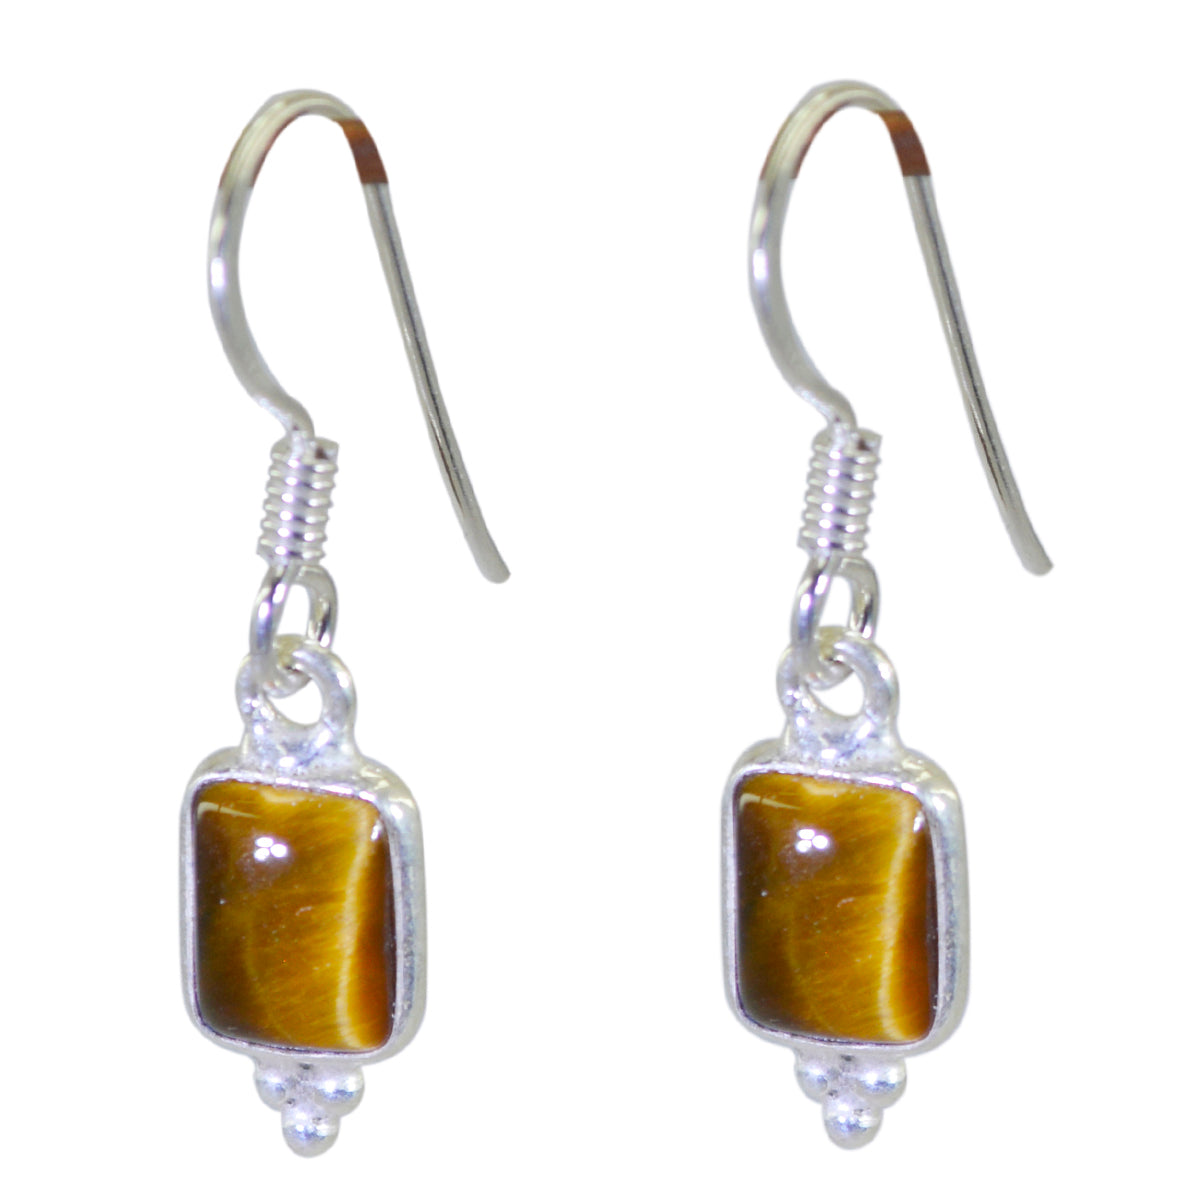 Riyo Natural Gemstone Octogon Cabochon Brown Tiger Eye Silver Earrings gift for labour day